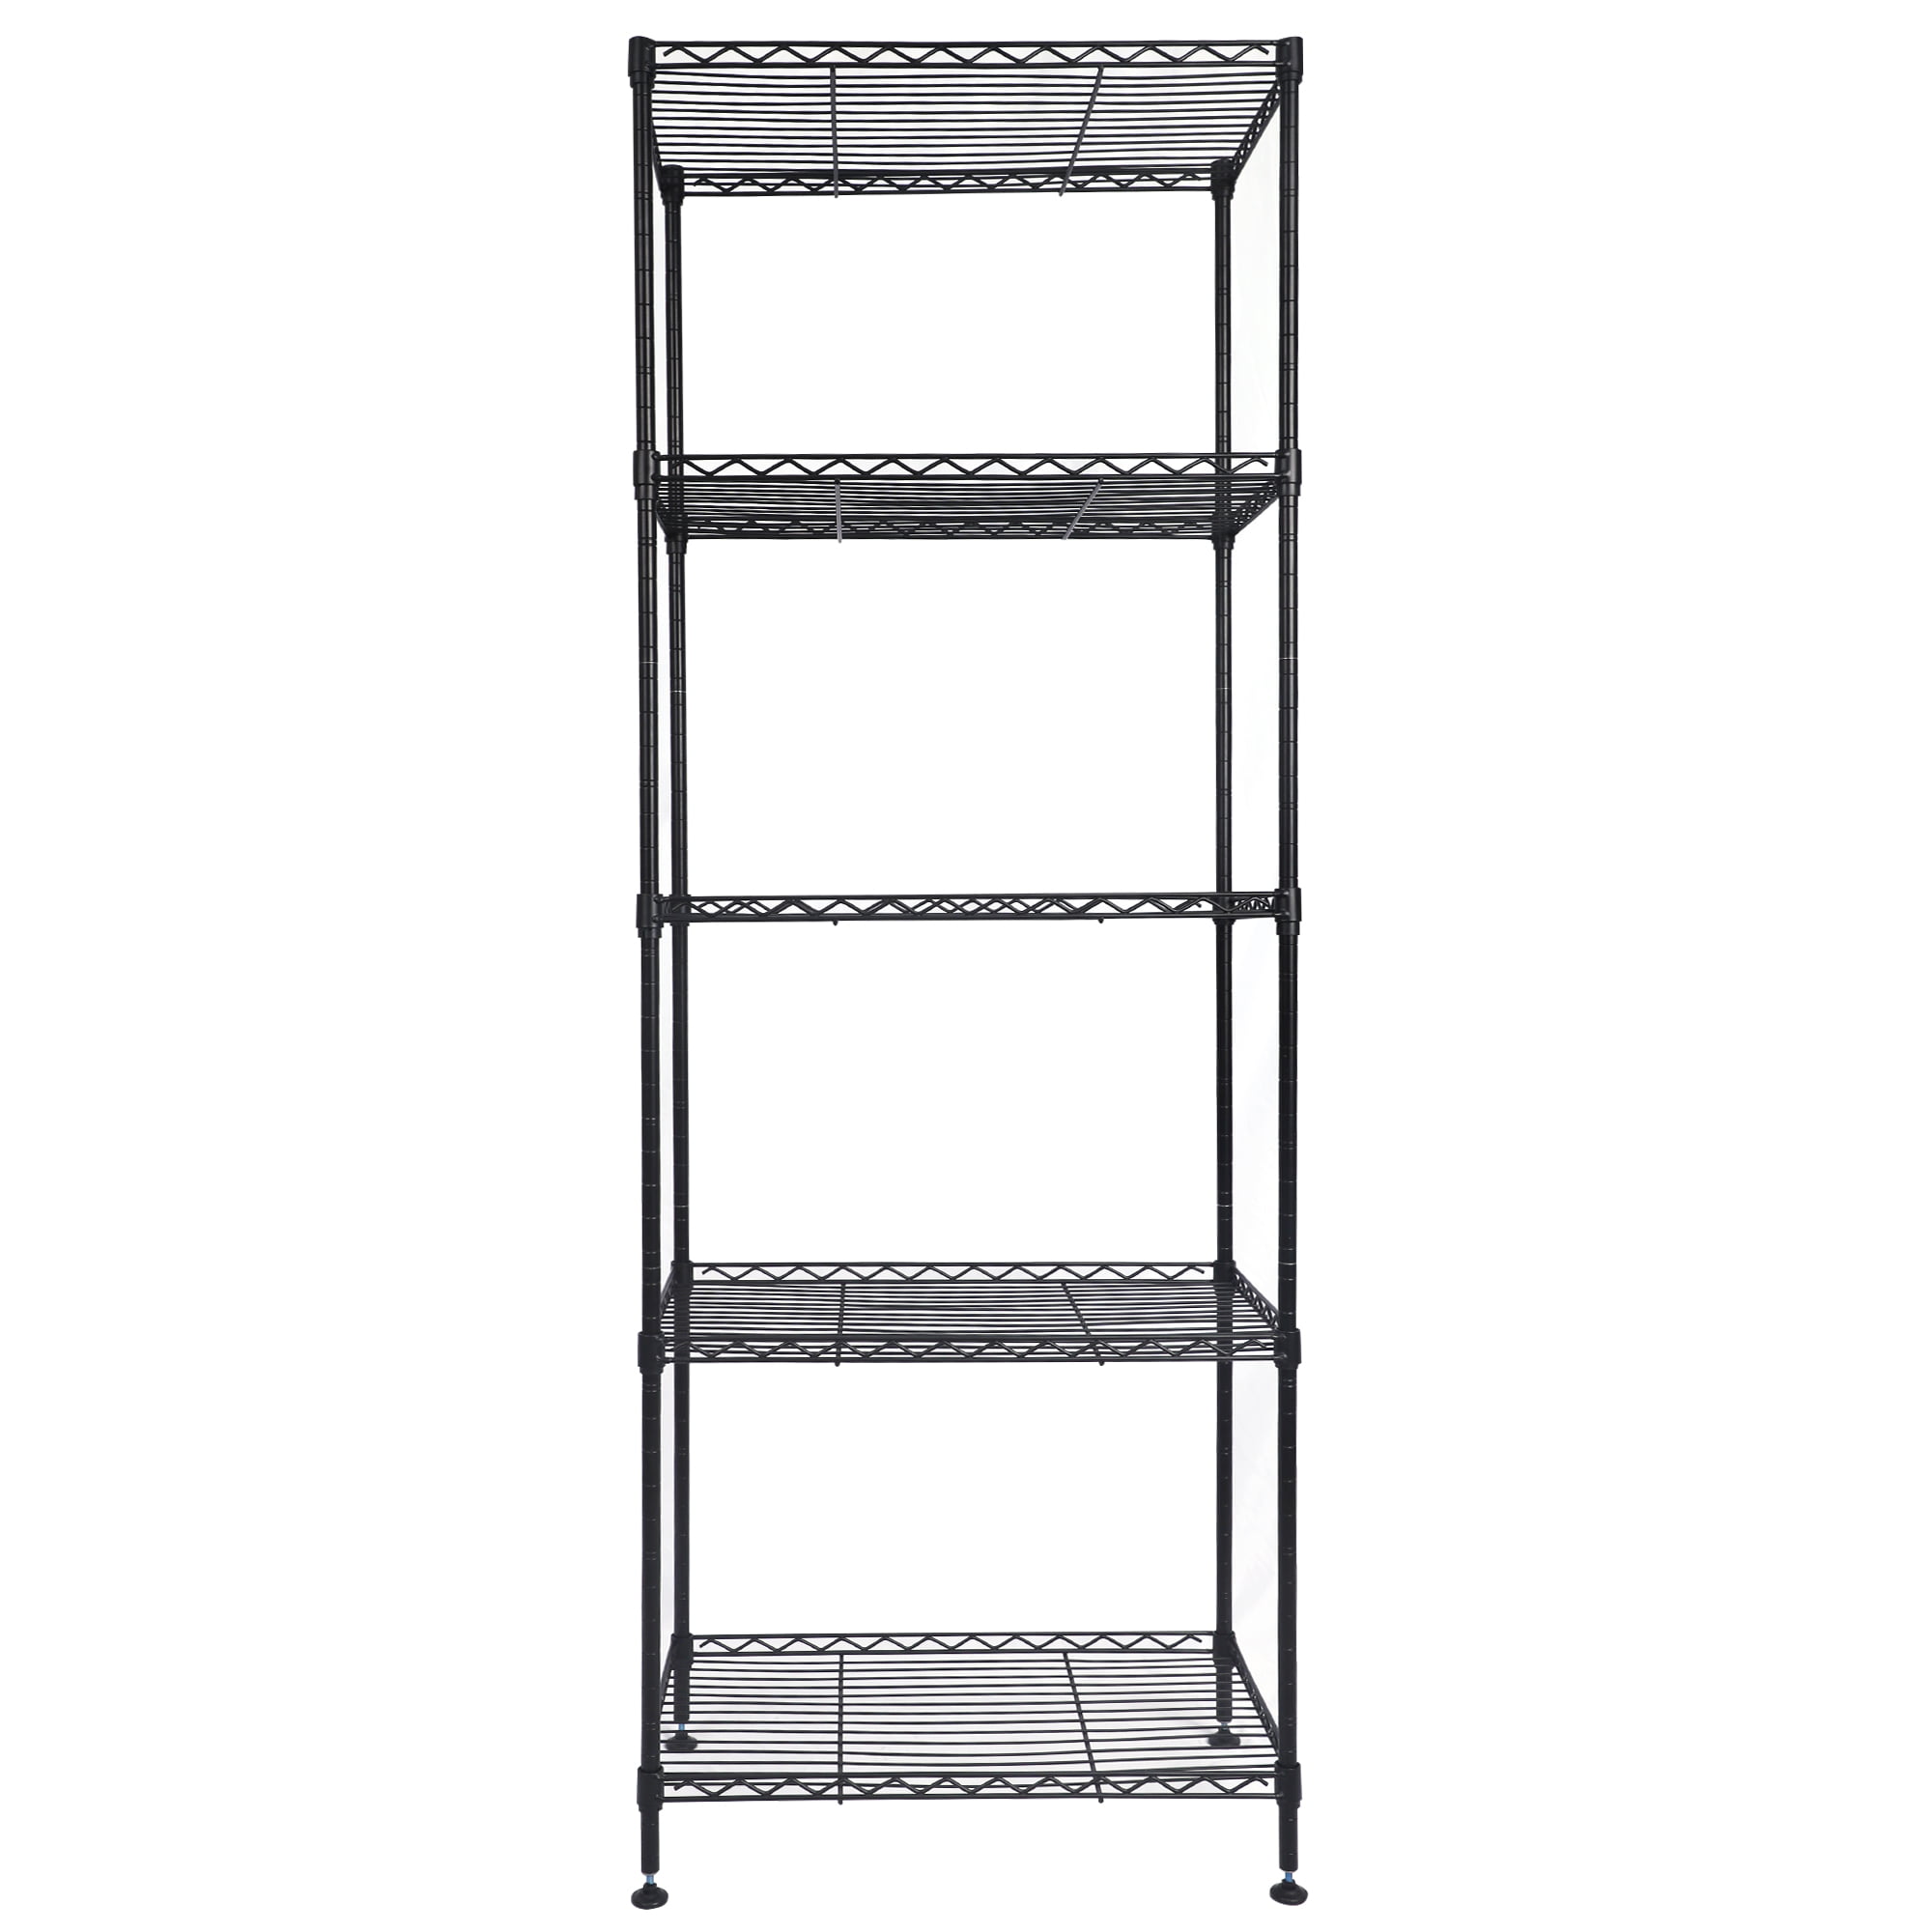 Heavy Duty Black 5 Tier Garage Racking Boltless Industrial Racking Shelving,Shed Shelf 150cm x 70cm x 30cm Industrial Strength & MDF Boards 875KG Capacity,Perfect Home Storage Solution 